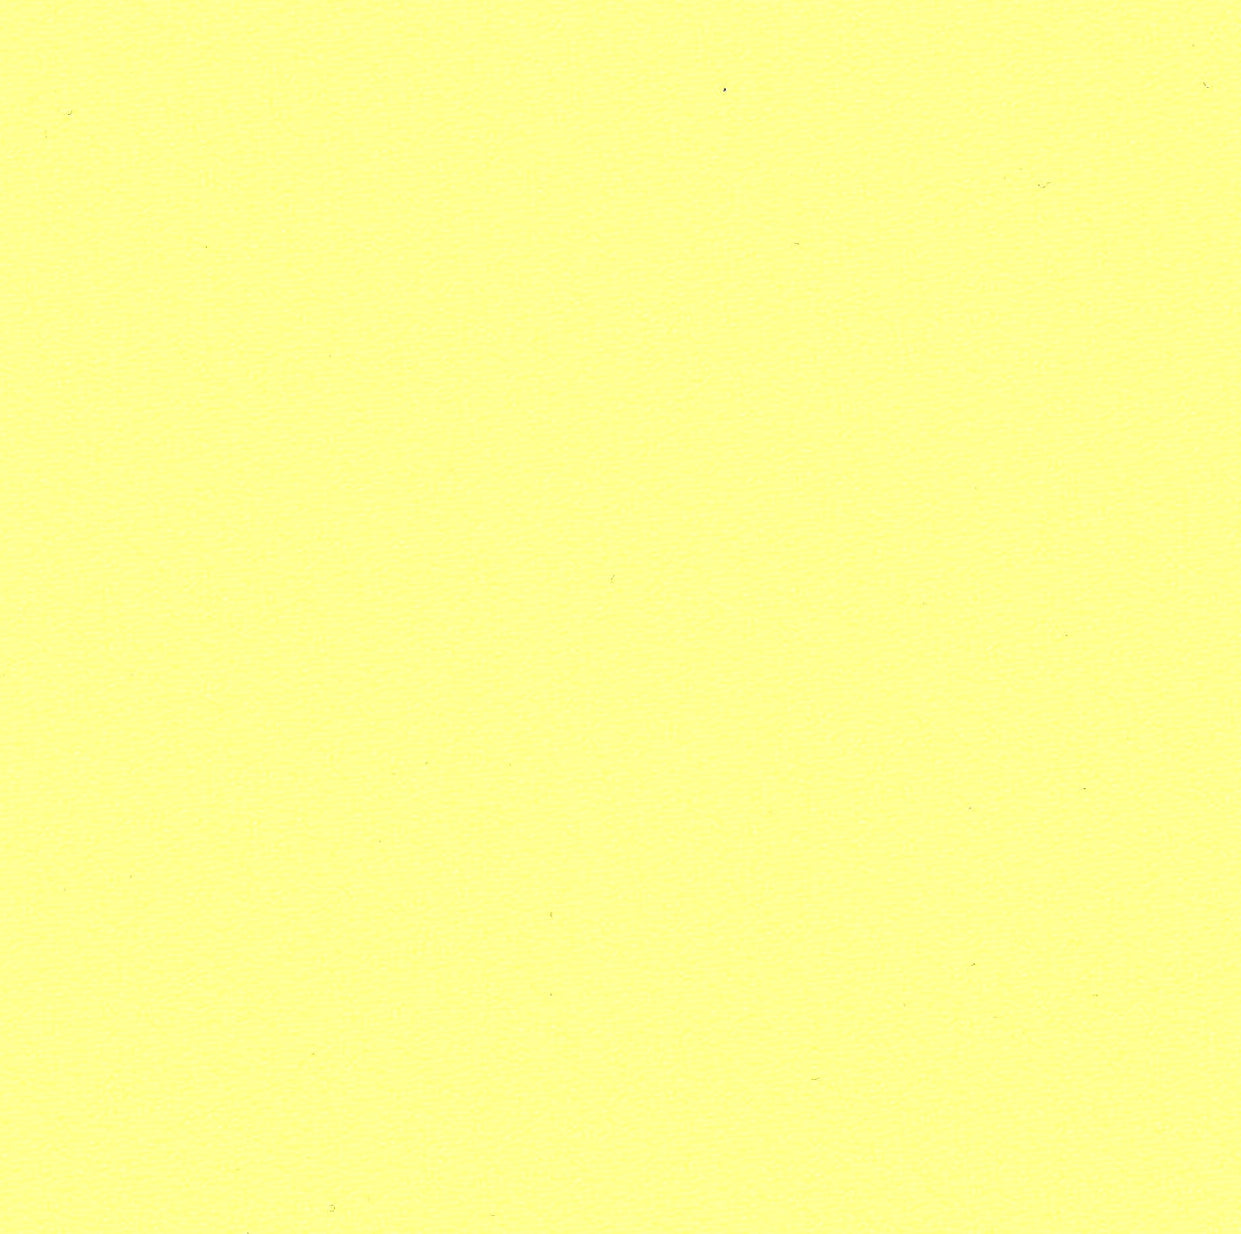 34018-04 Light Yellow Montel Crepe Pain Dyed Blend 223g/yd 45" crepe plain dyed polyester spandex woven yellow Solid Color, Crepe - knit fabric - woven fabric - fabric company - fabric wholesale - fabric b2b - fabric factory - high quality fabric - hong kong fabric - fabric hk - acetate fabric - cotton fabric - linen fabric - metallic fabric - nylon fabric - polyester fabric - spandex fabric - chun wing hing - cwh hk - fabric worldwide ship - 針織布 - 梳織布 - 布料公司- 布料批發 - 香港布料 - 秦榮興